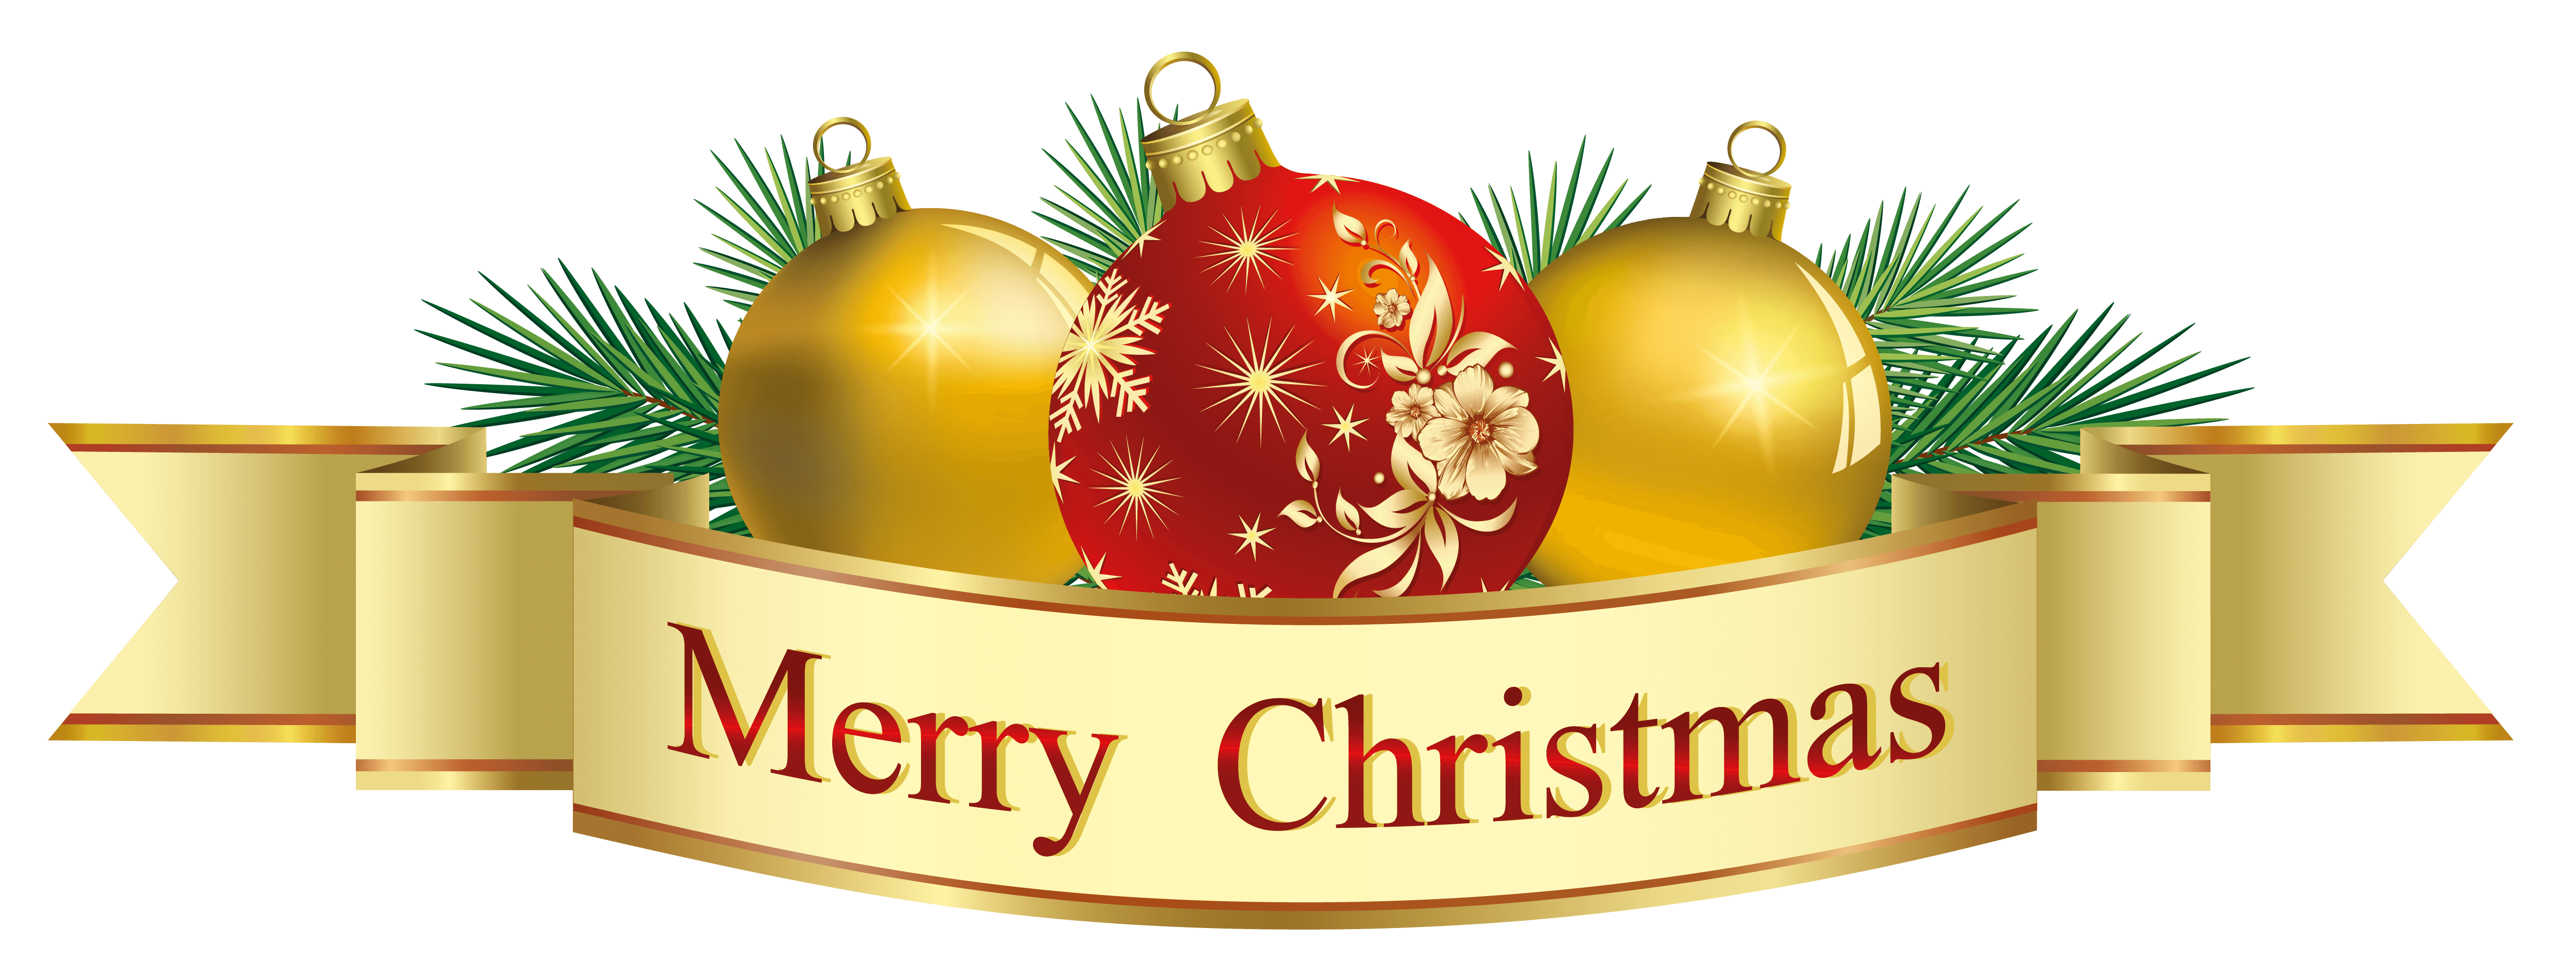 Merry christmas and happy. Santa clipart banner